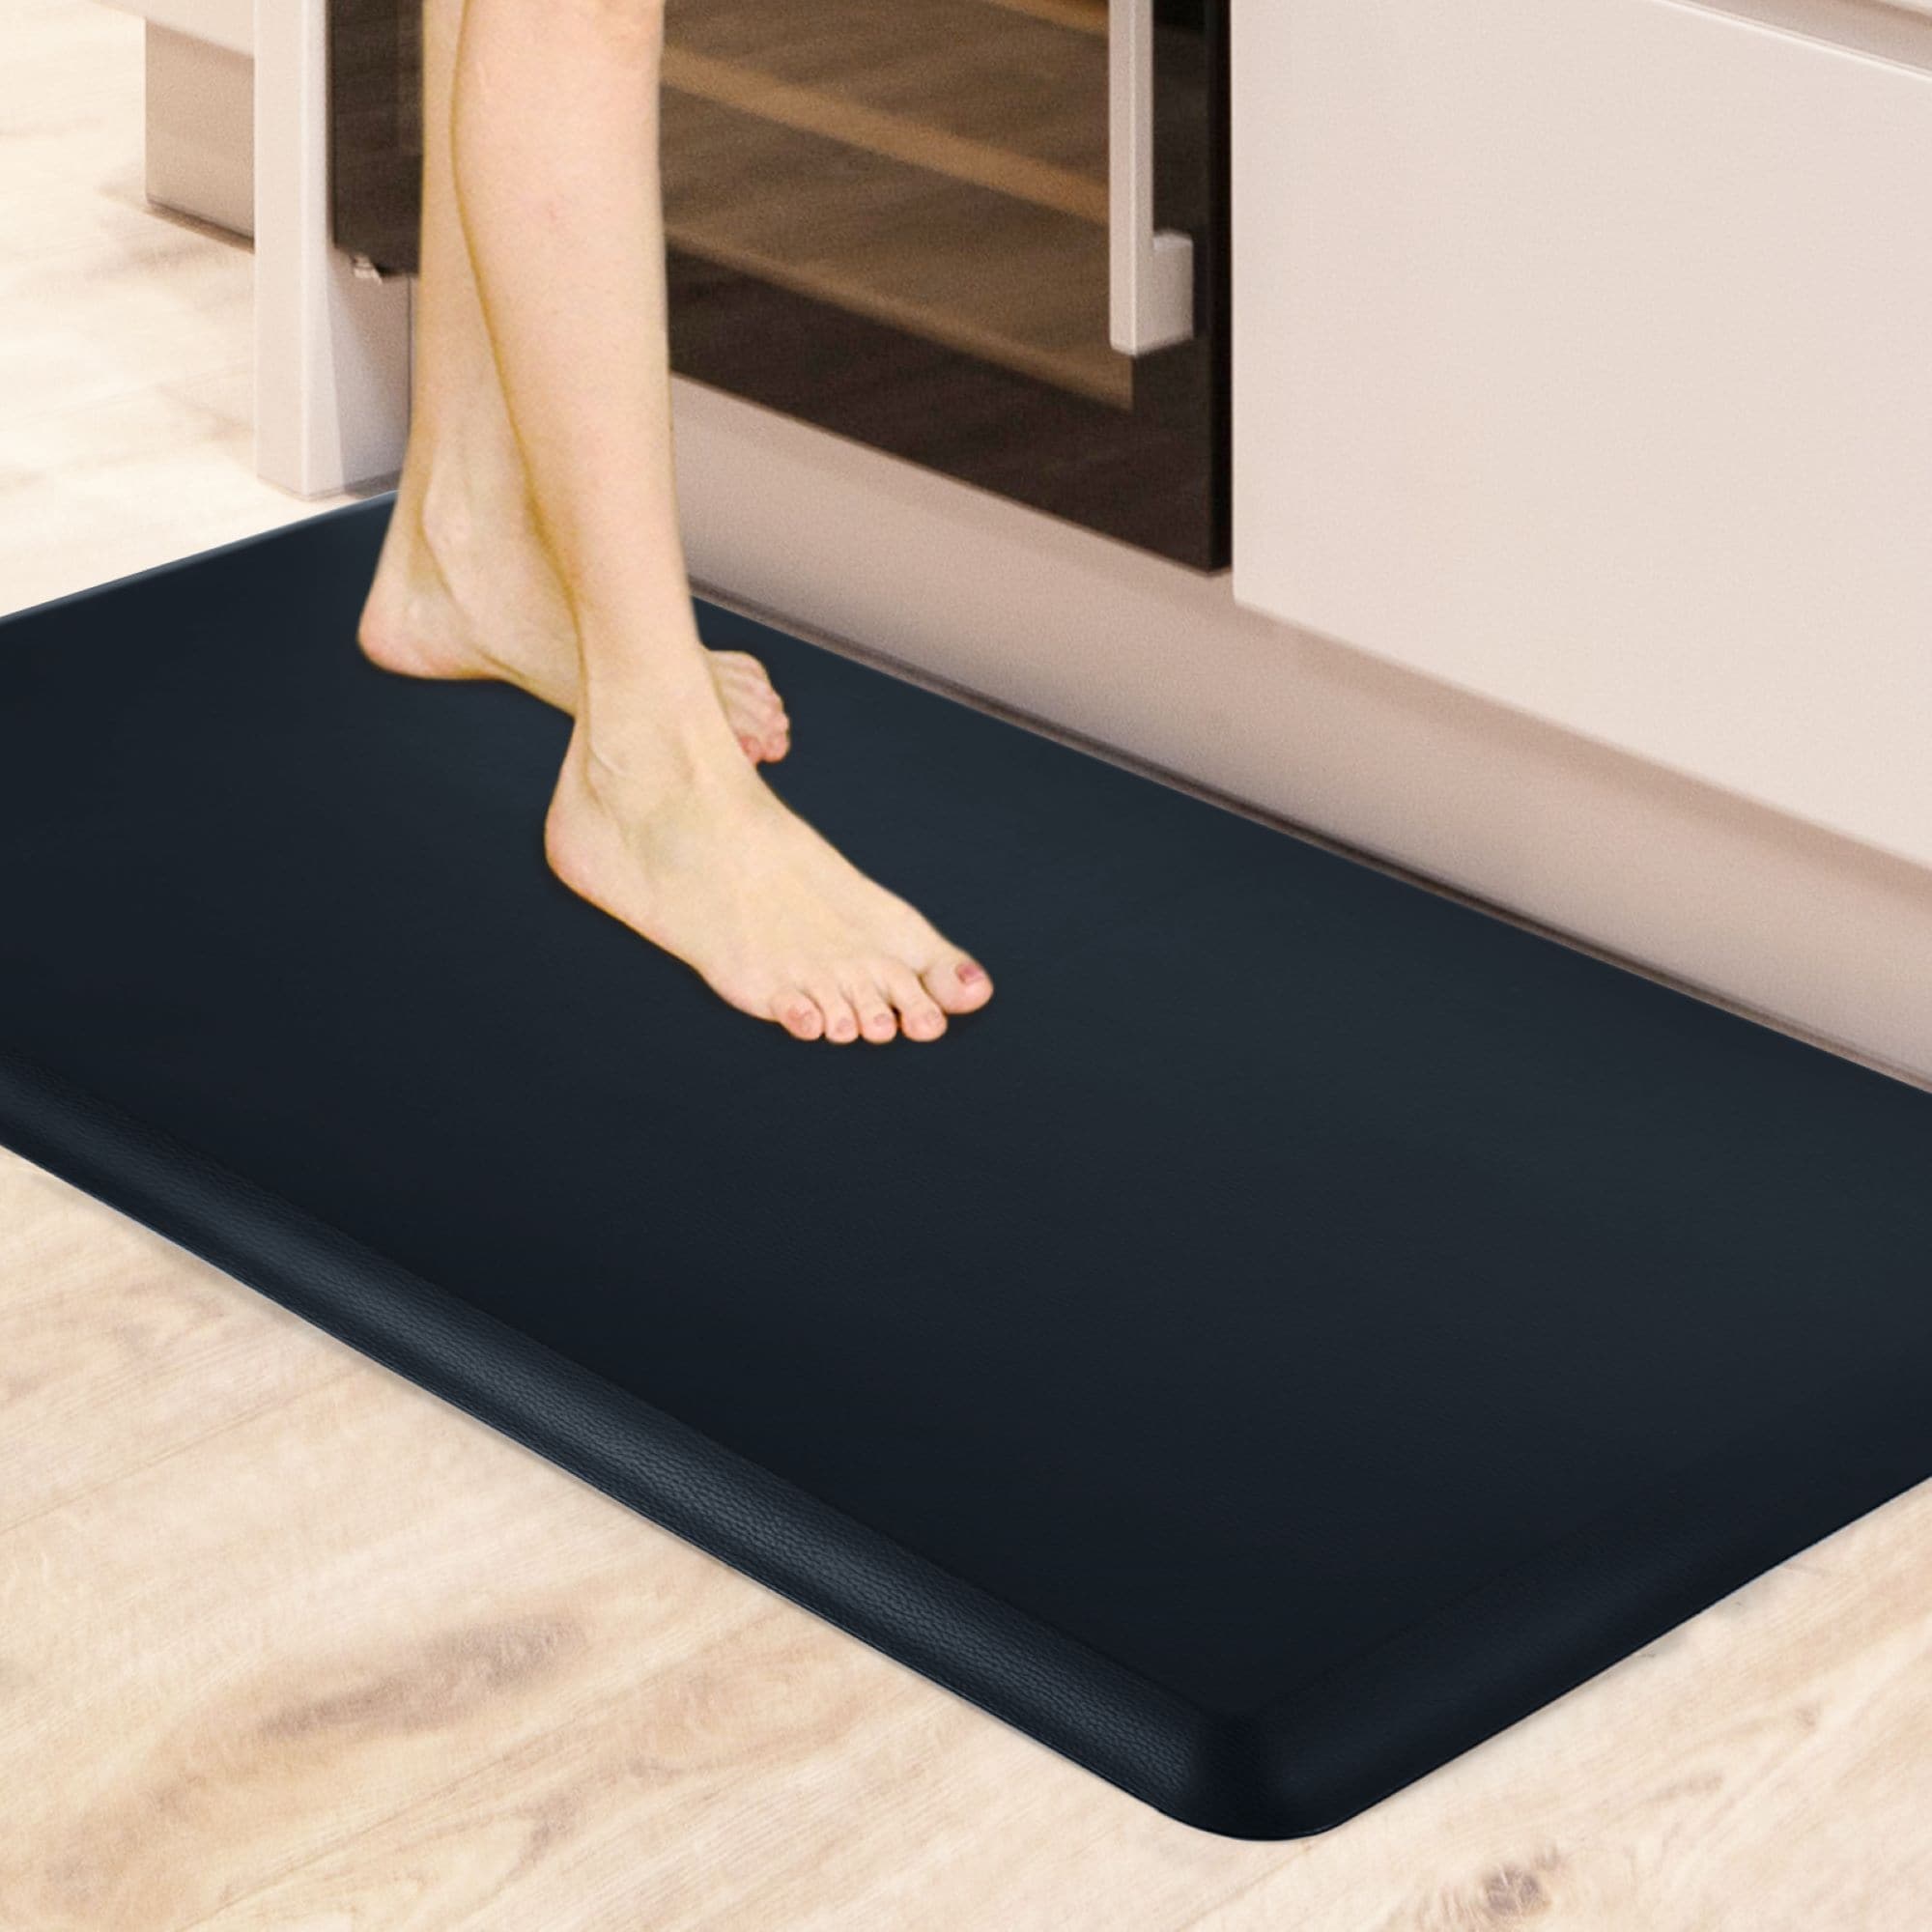 https://ak1.ostkcdn.com/images/products/is/images/direct/17d79e042f74e532cd637469289f64ff010e432d/Premium-Anti-Fatigue-Comfort-Mat%2C-Thick%2C-Non-Slip-%26-All-Purpose-Comfort---for-Kitchen%2C-Office-Standing-Desk.jpg